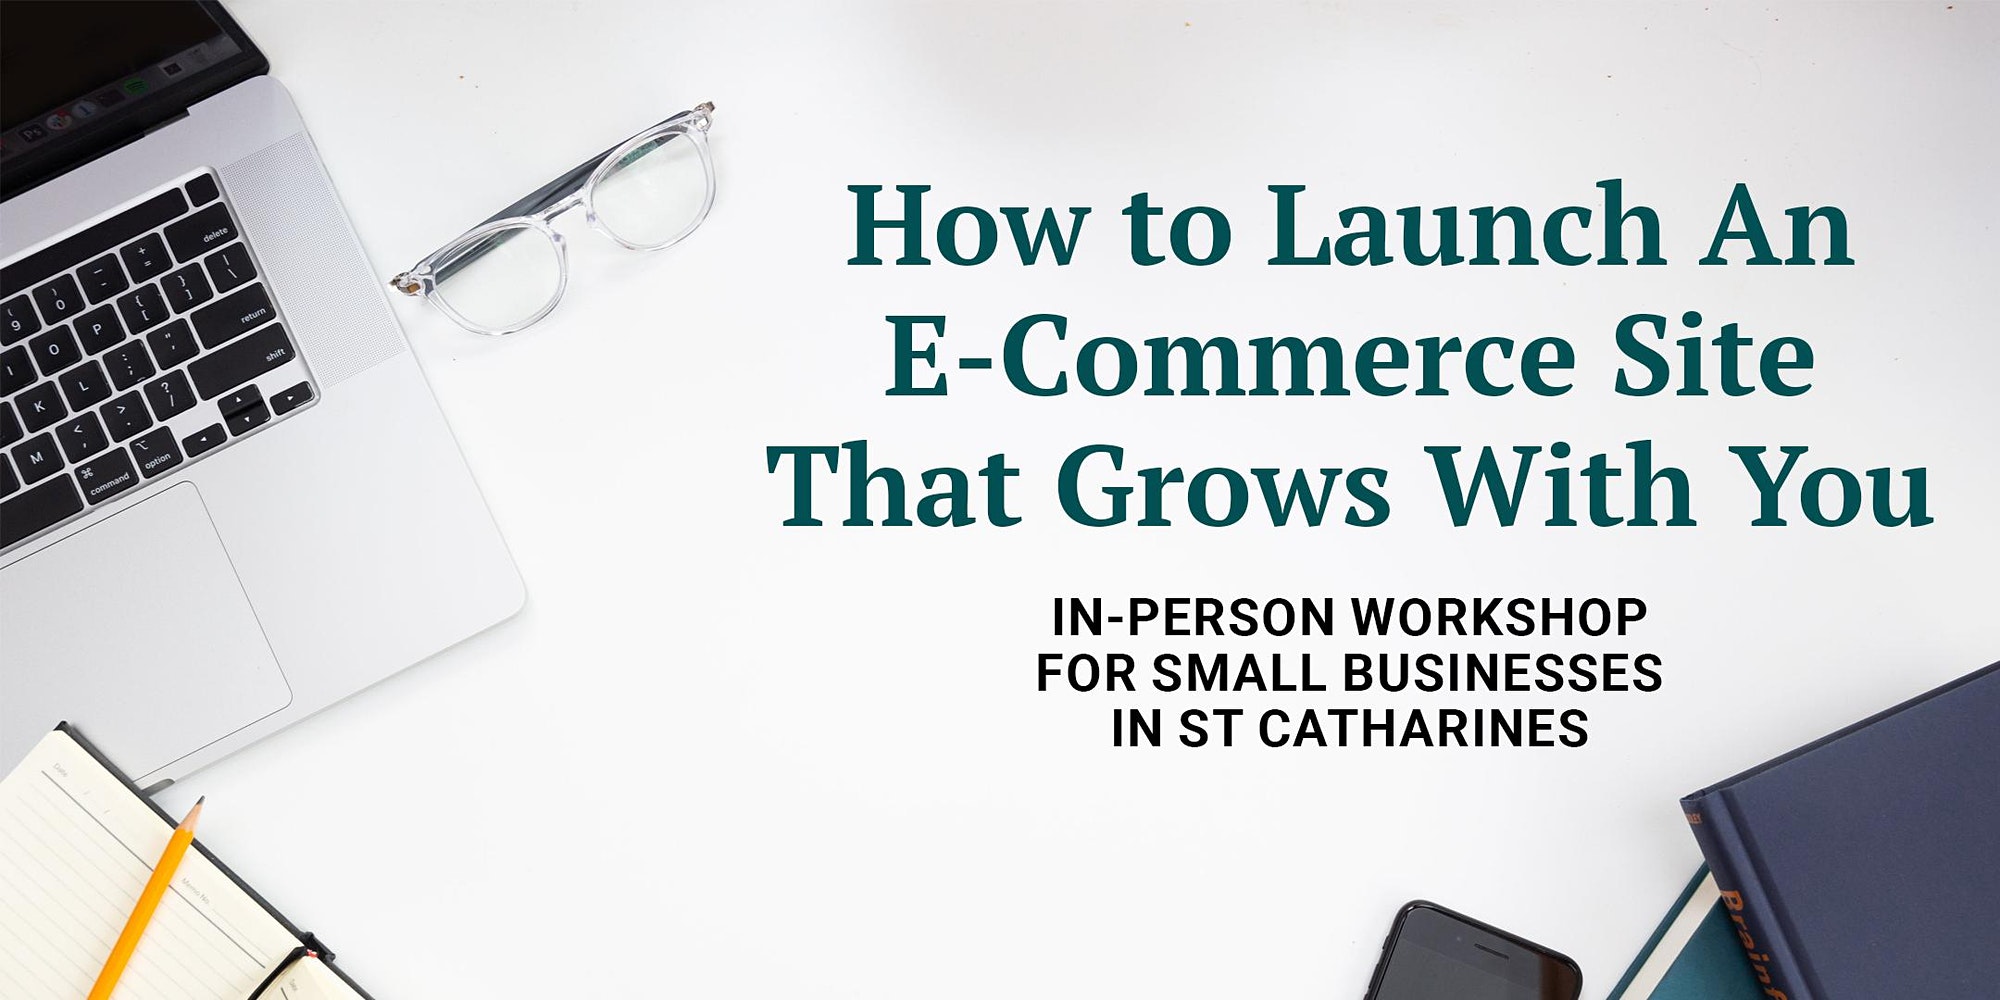 How to launch an e-commerce site that grows with you: In-person workshop for small businesses in St. Catharines